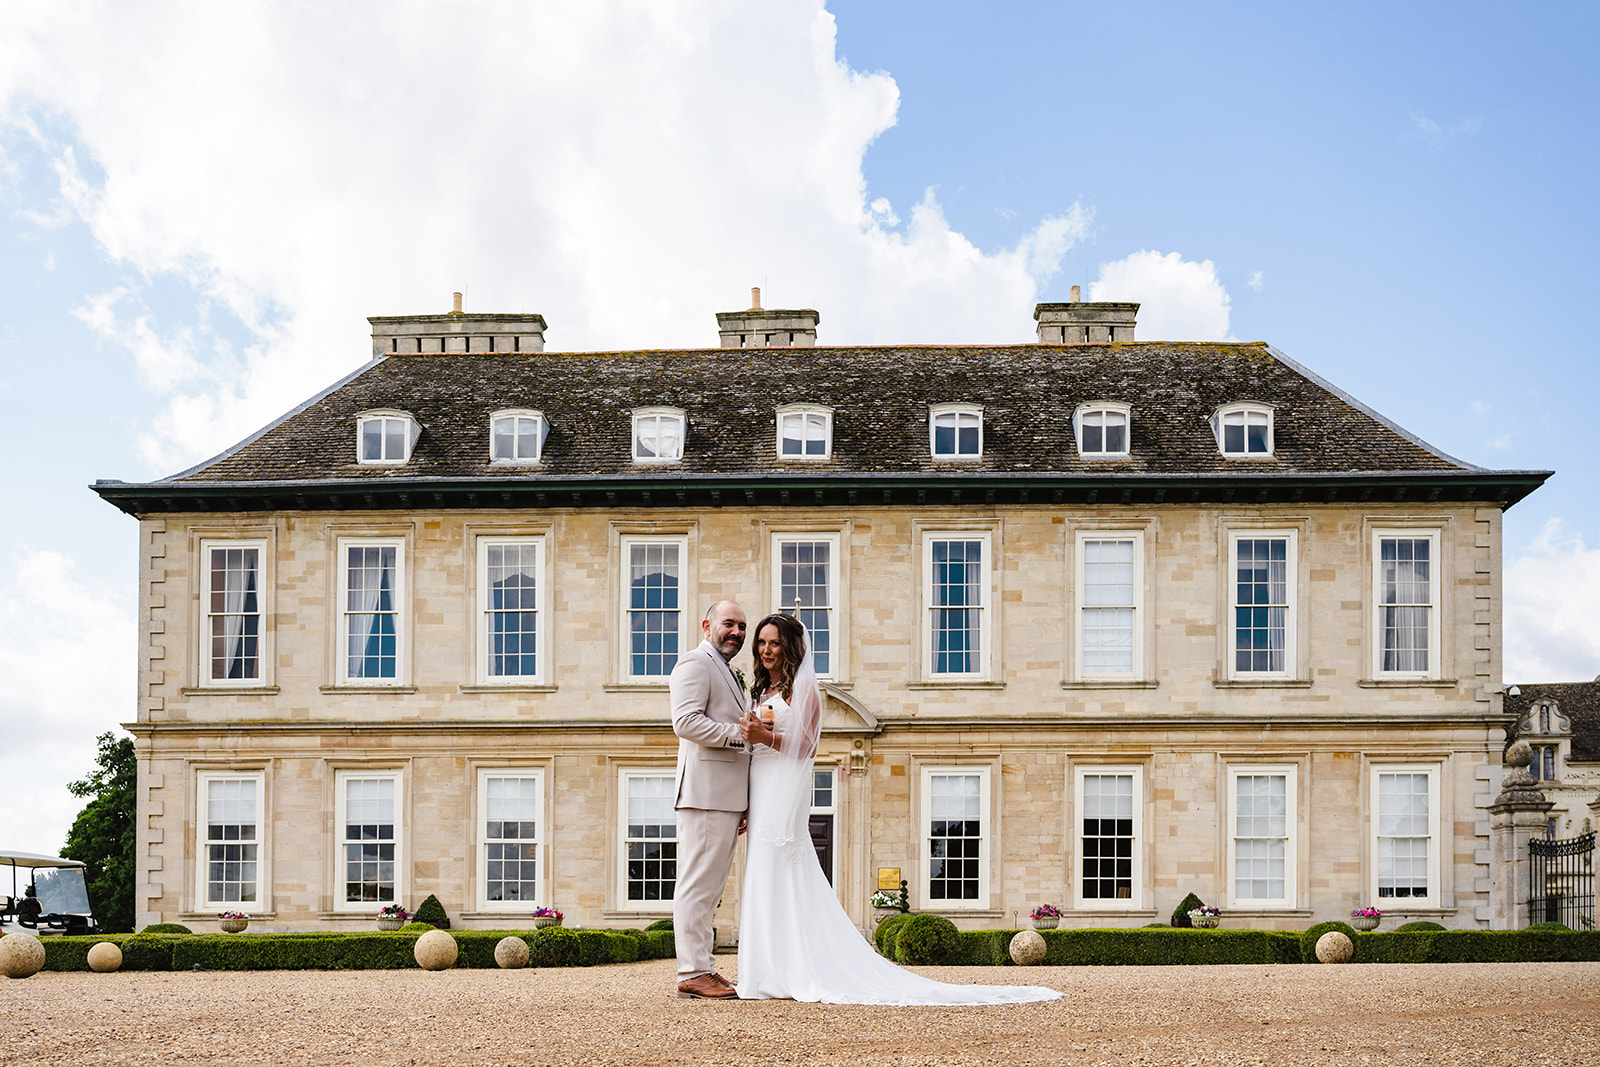 Bride and groom wedding portrait at the front of Stapleford Park hotel by Amanda Forman Photography